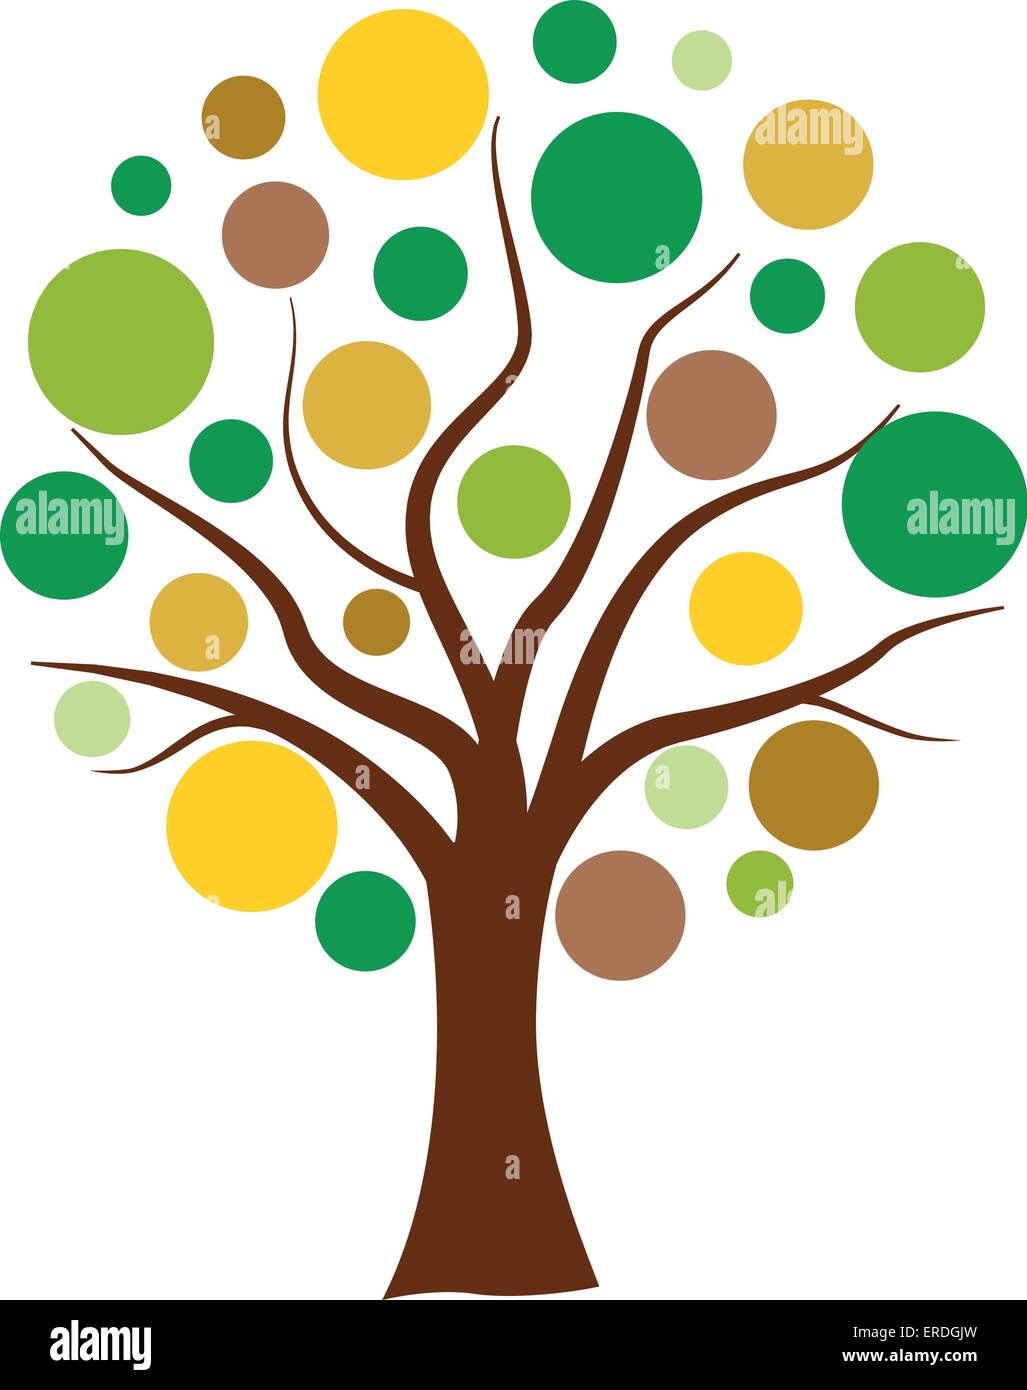 Vector illustration of colorful tree bubbles concept Stock Vector